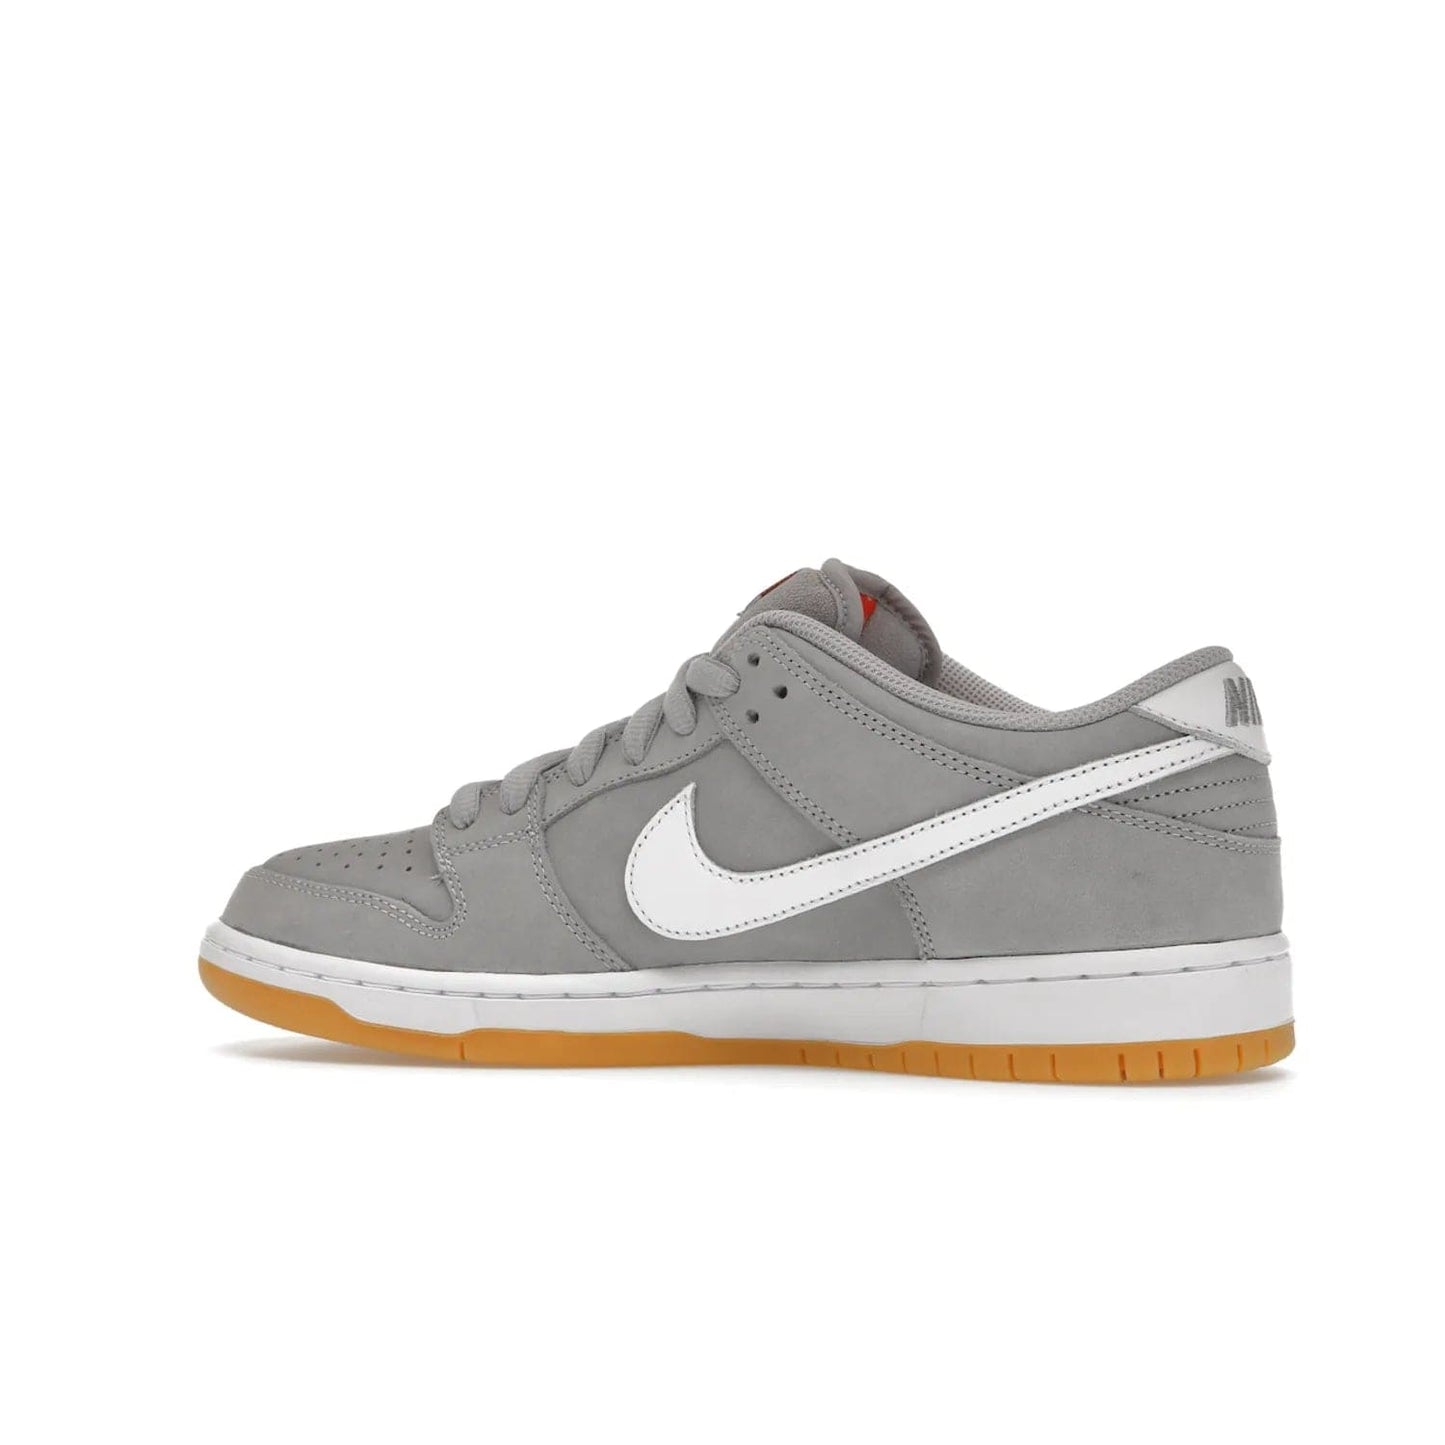 Nike SB Dunk Low Pro ISO Orange Label Wolf Grey Gum - Image 21 - Only at www.BallersClubKickz.com - Introducing Nike's SB Dunk Low Pro ISO Orange Label Wolf Grey Gum - a stylish shoe with a premium Wolf Grey upper, white leather Nike Swoosh, and an eye-catching gum outsole. With special Nike branding and packaging, this shoe adds a unique fashion statement. Out Feb. 24, 2023.